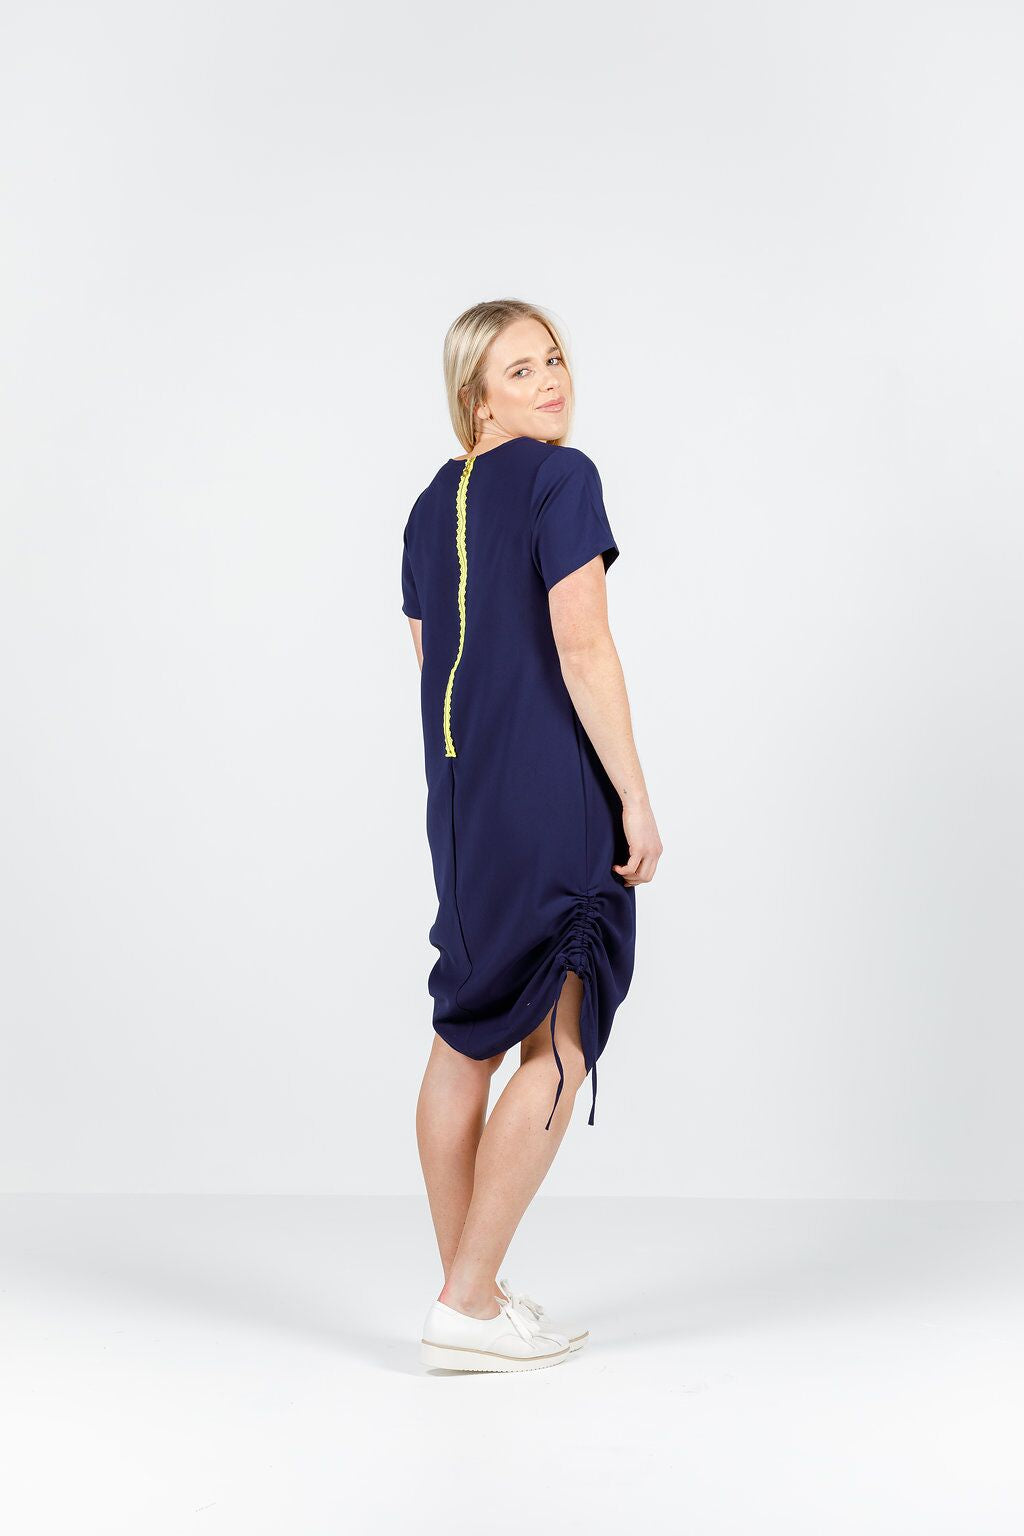 Ruched Zip Dress - Sale - Navy with yellow zipper